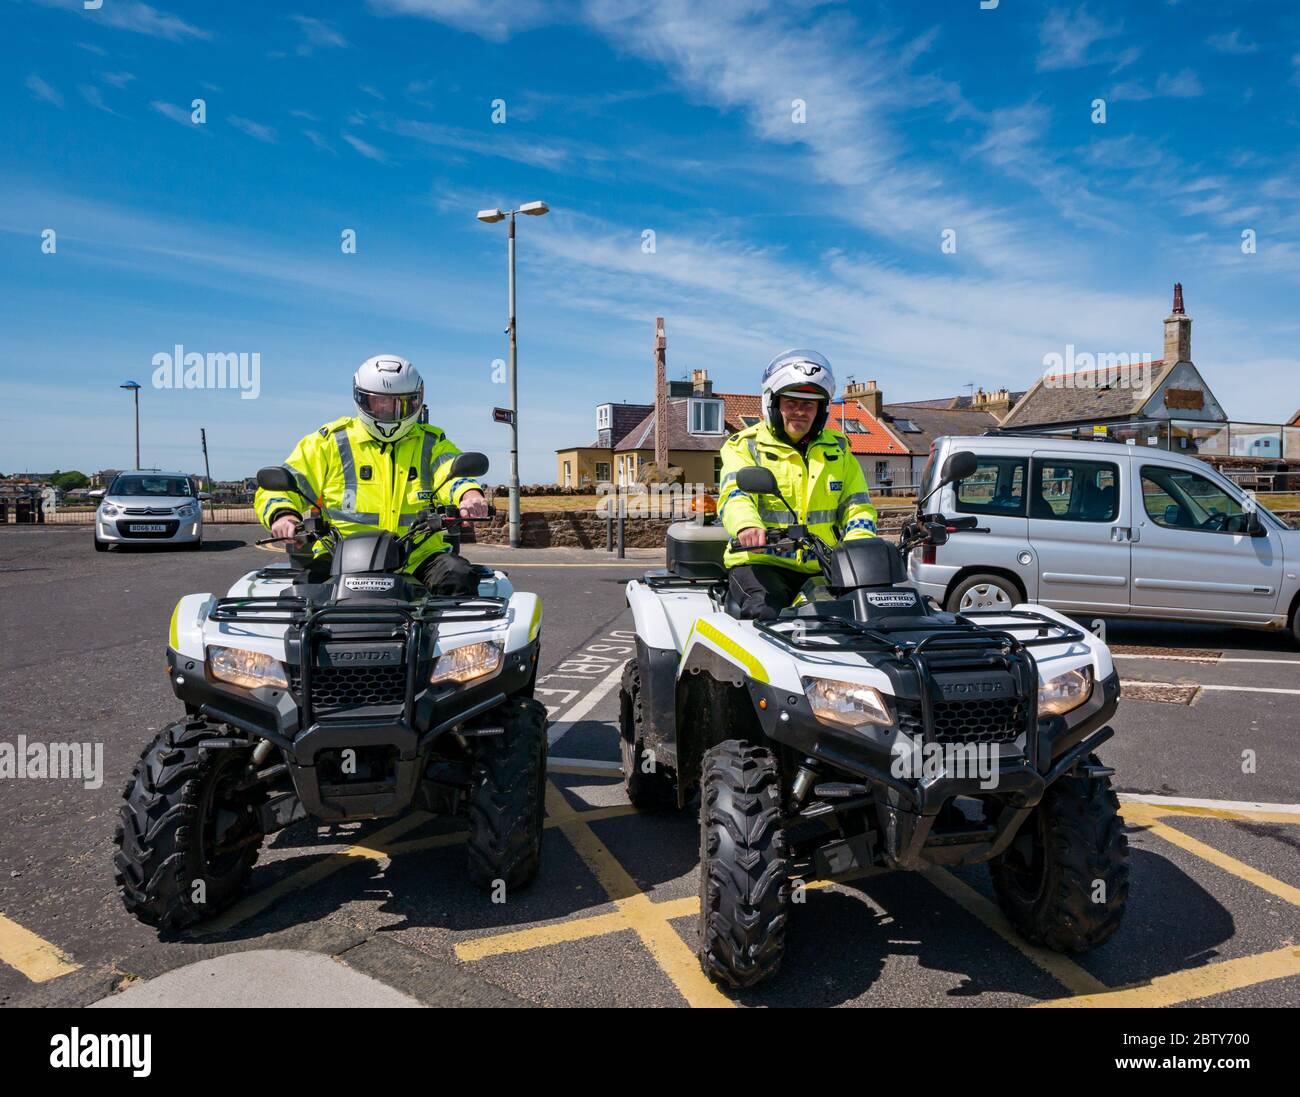 North Berwick, East Lothian, Scotland, United Kingdom, 28th May 2020. Easing of lockdown restrictions: with the Scottish Government set to announce the lifting of some lockdown restrictions today, there are already signs that things are beginning to return to normal in the popular seaside town. Police on quad bikes take a rest stop from their lockdown patrol Stock Photo